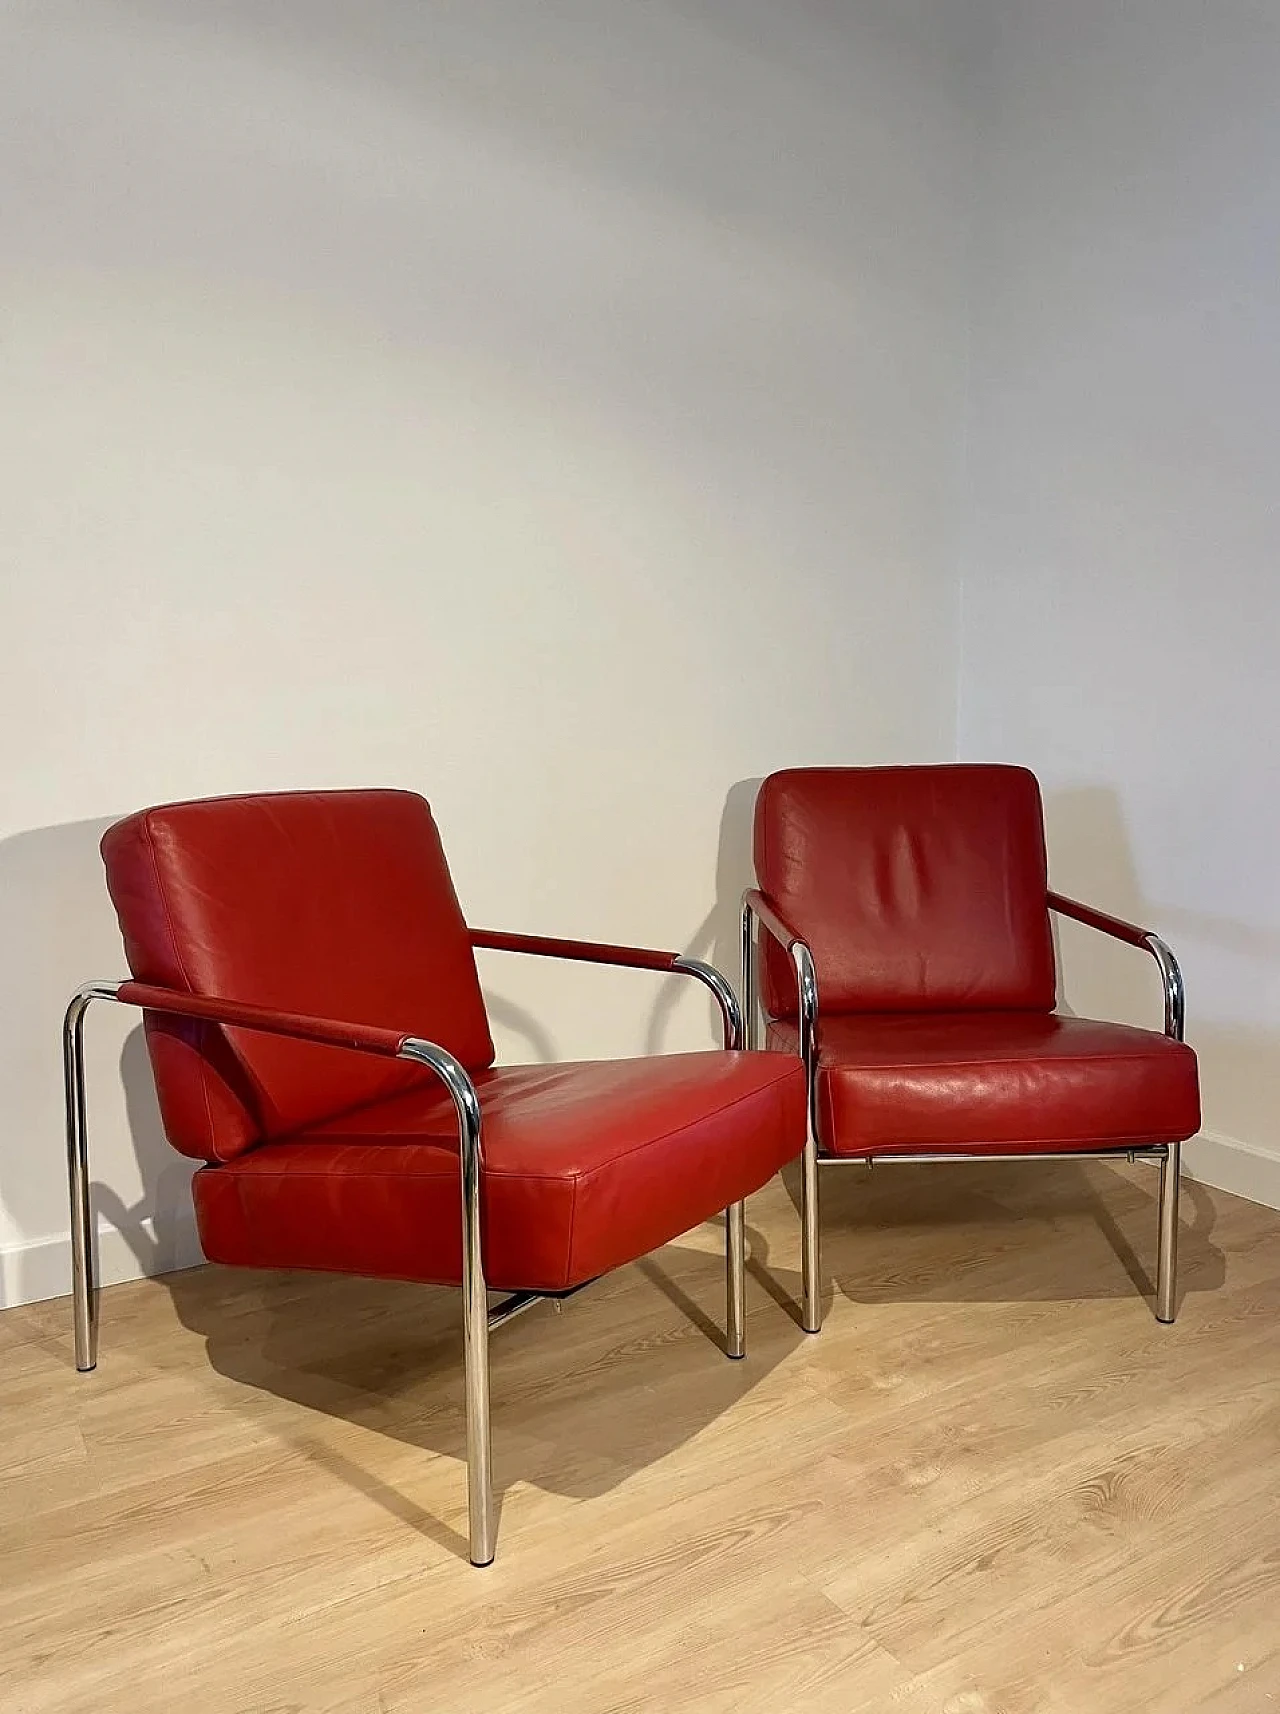 Pair of Susanna armchairs by Gabriele Mucchi for Zanotta 1